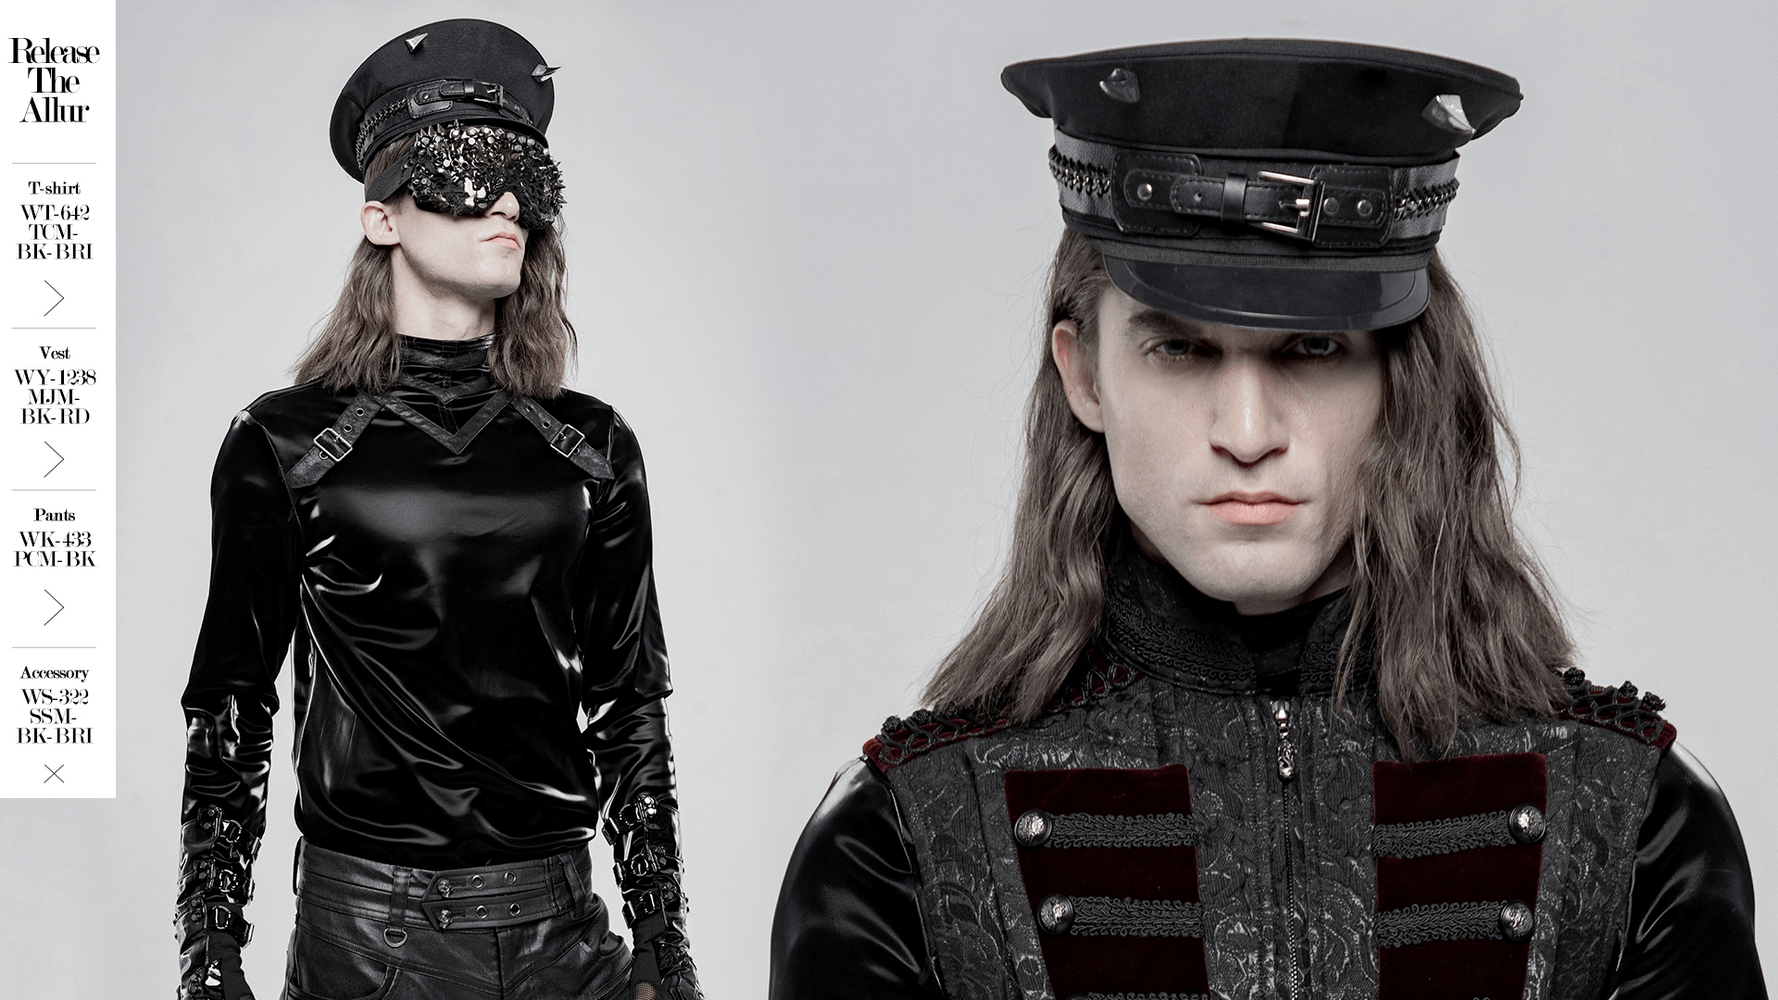 Edgy Punk Military Cap with PU Leather Buckles and Spikes